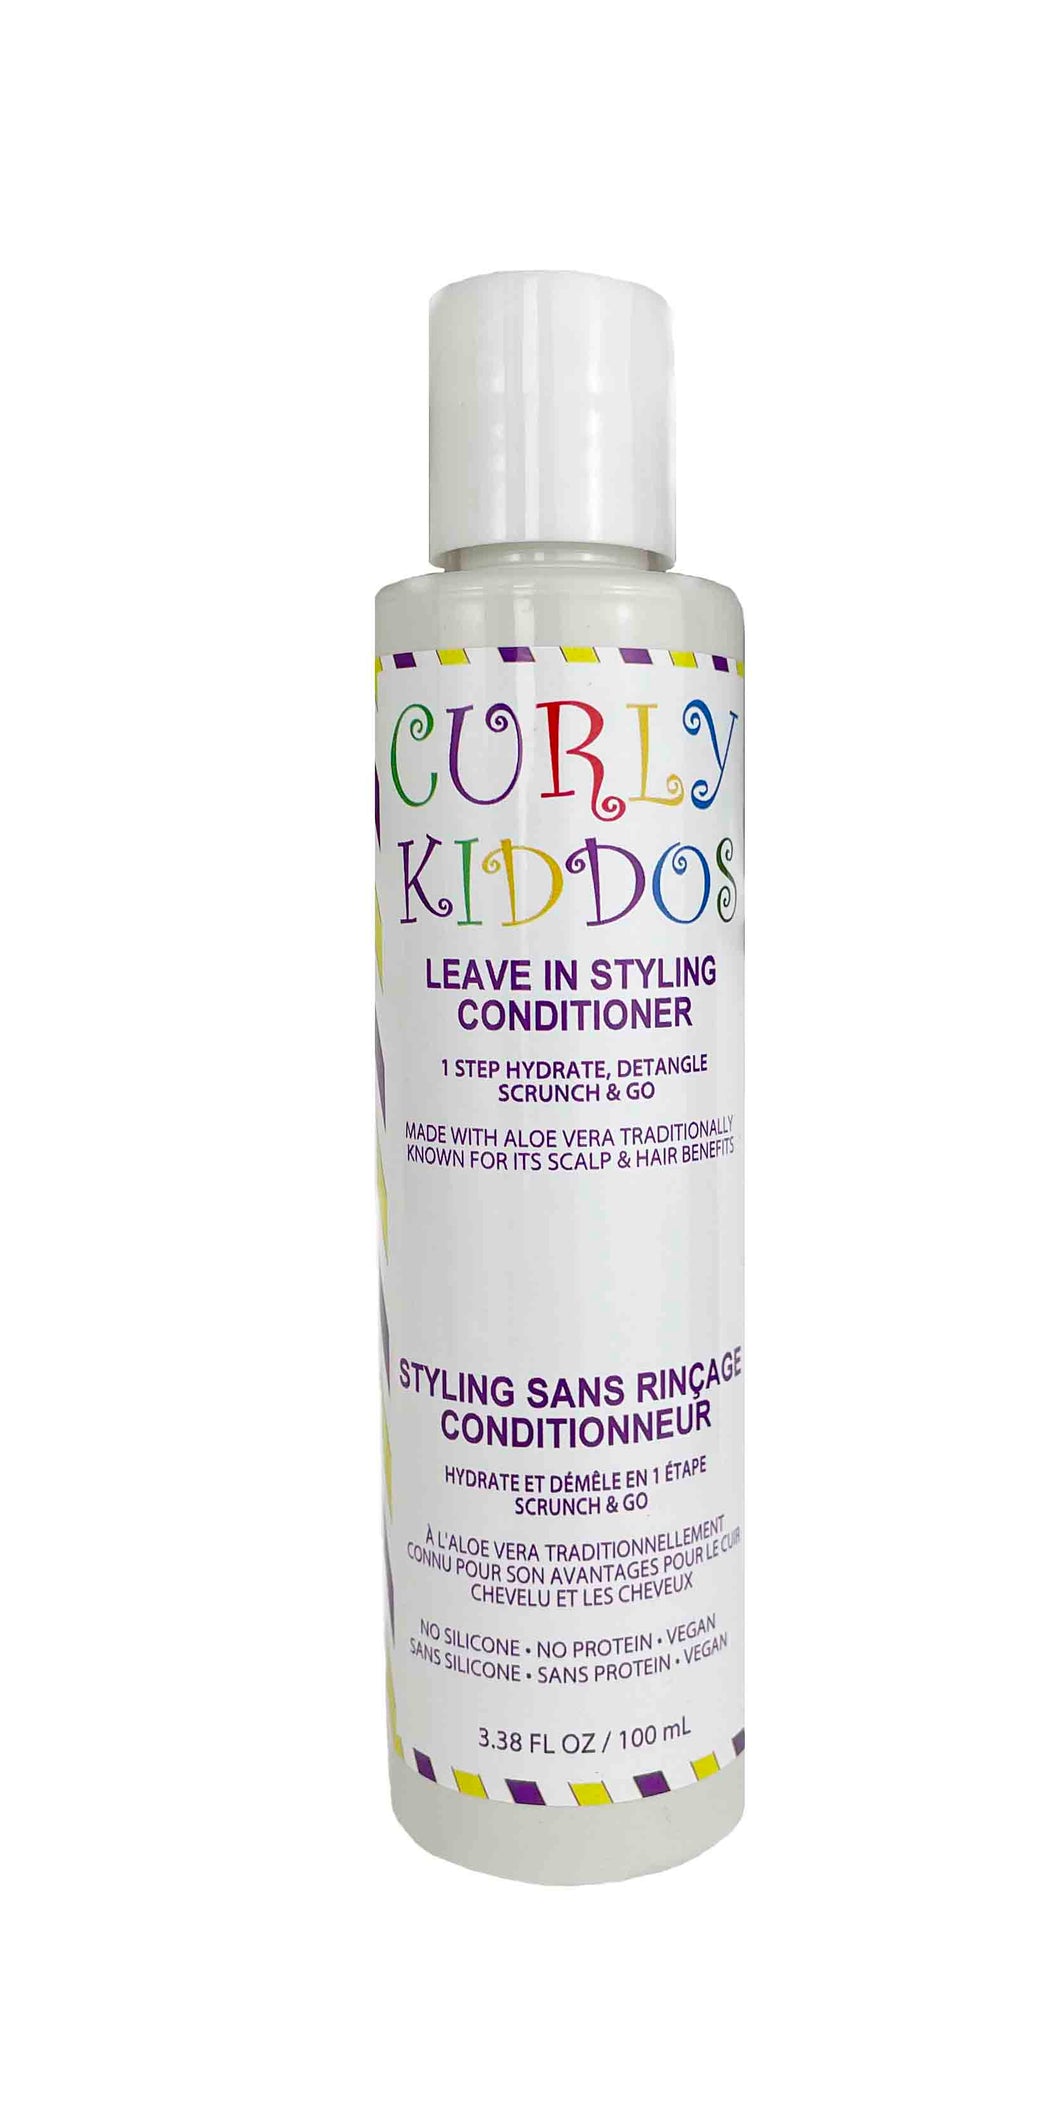 Curly Kiddos Leave In Styling Conditioner